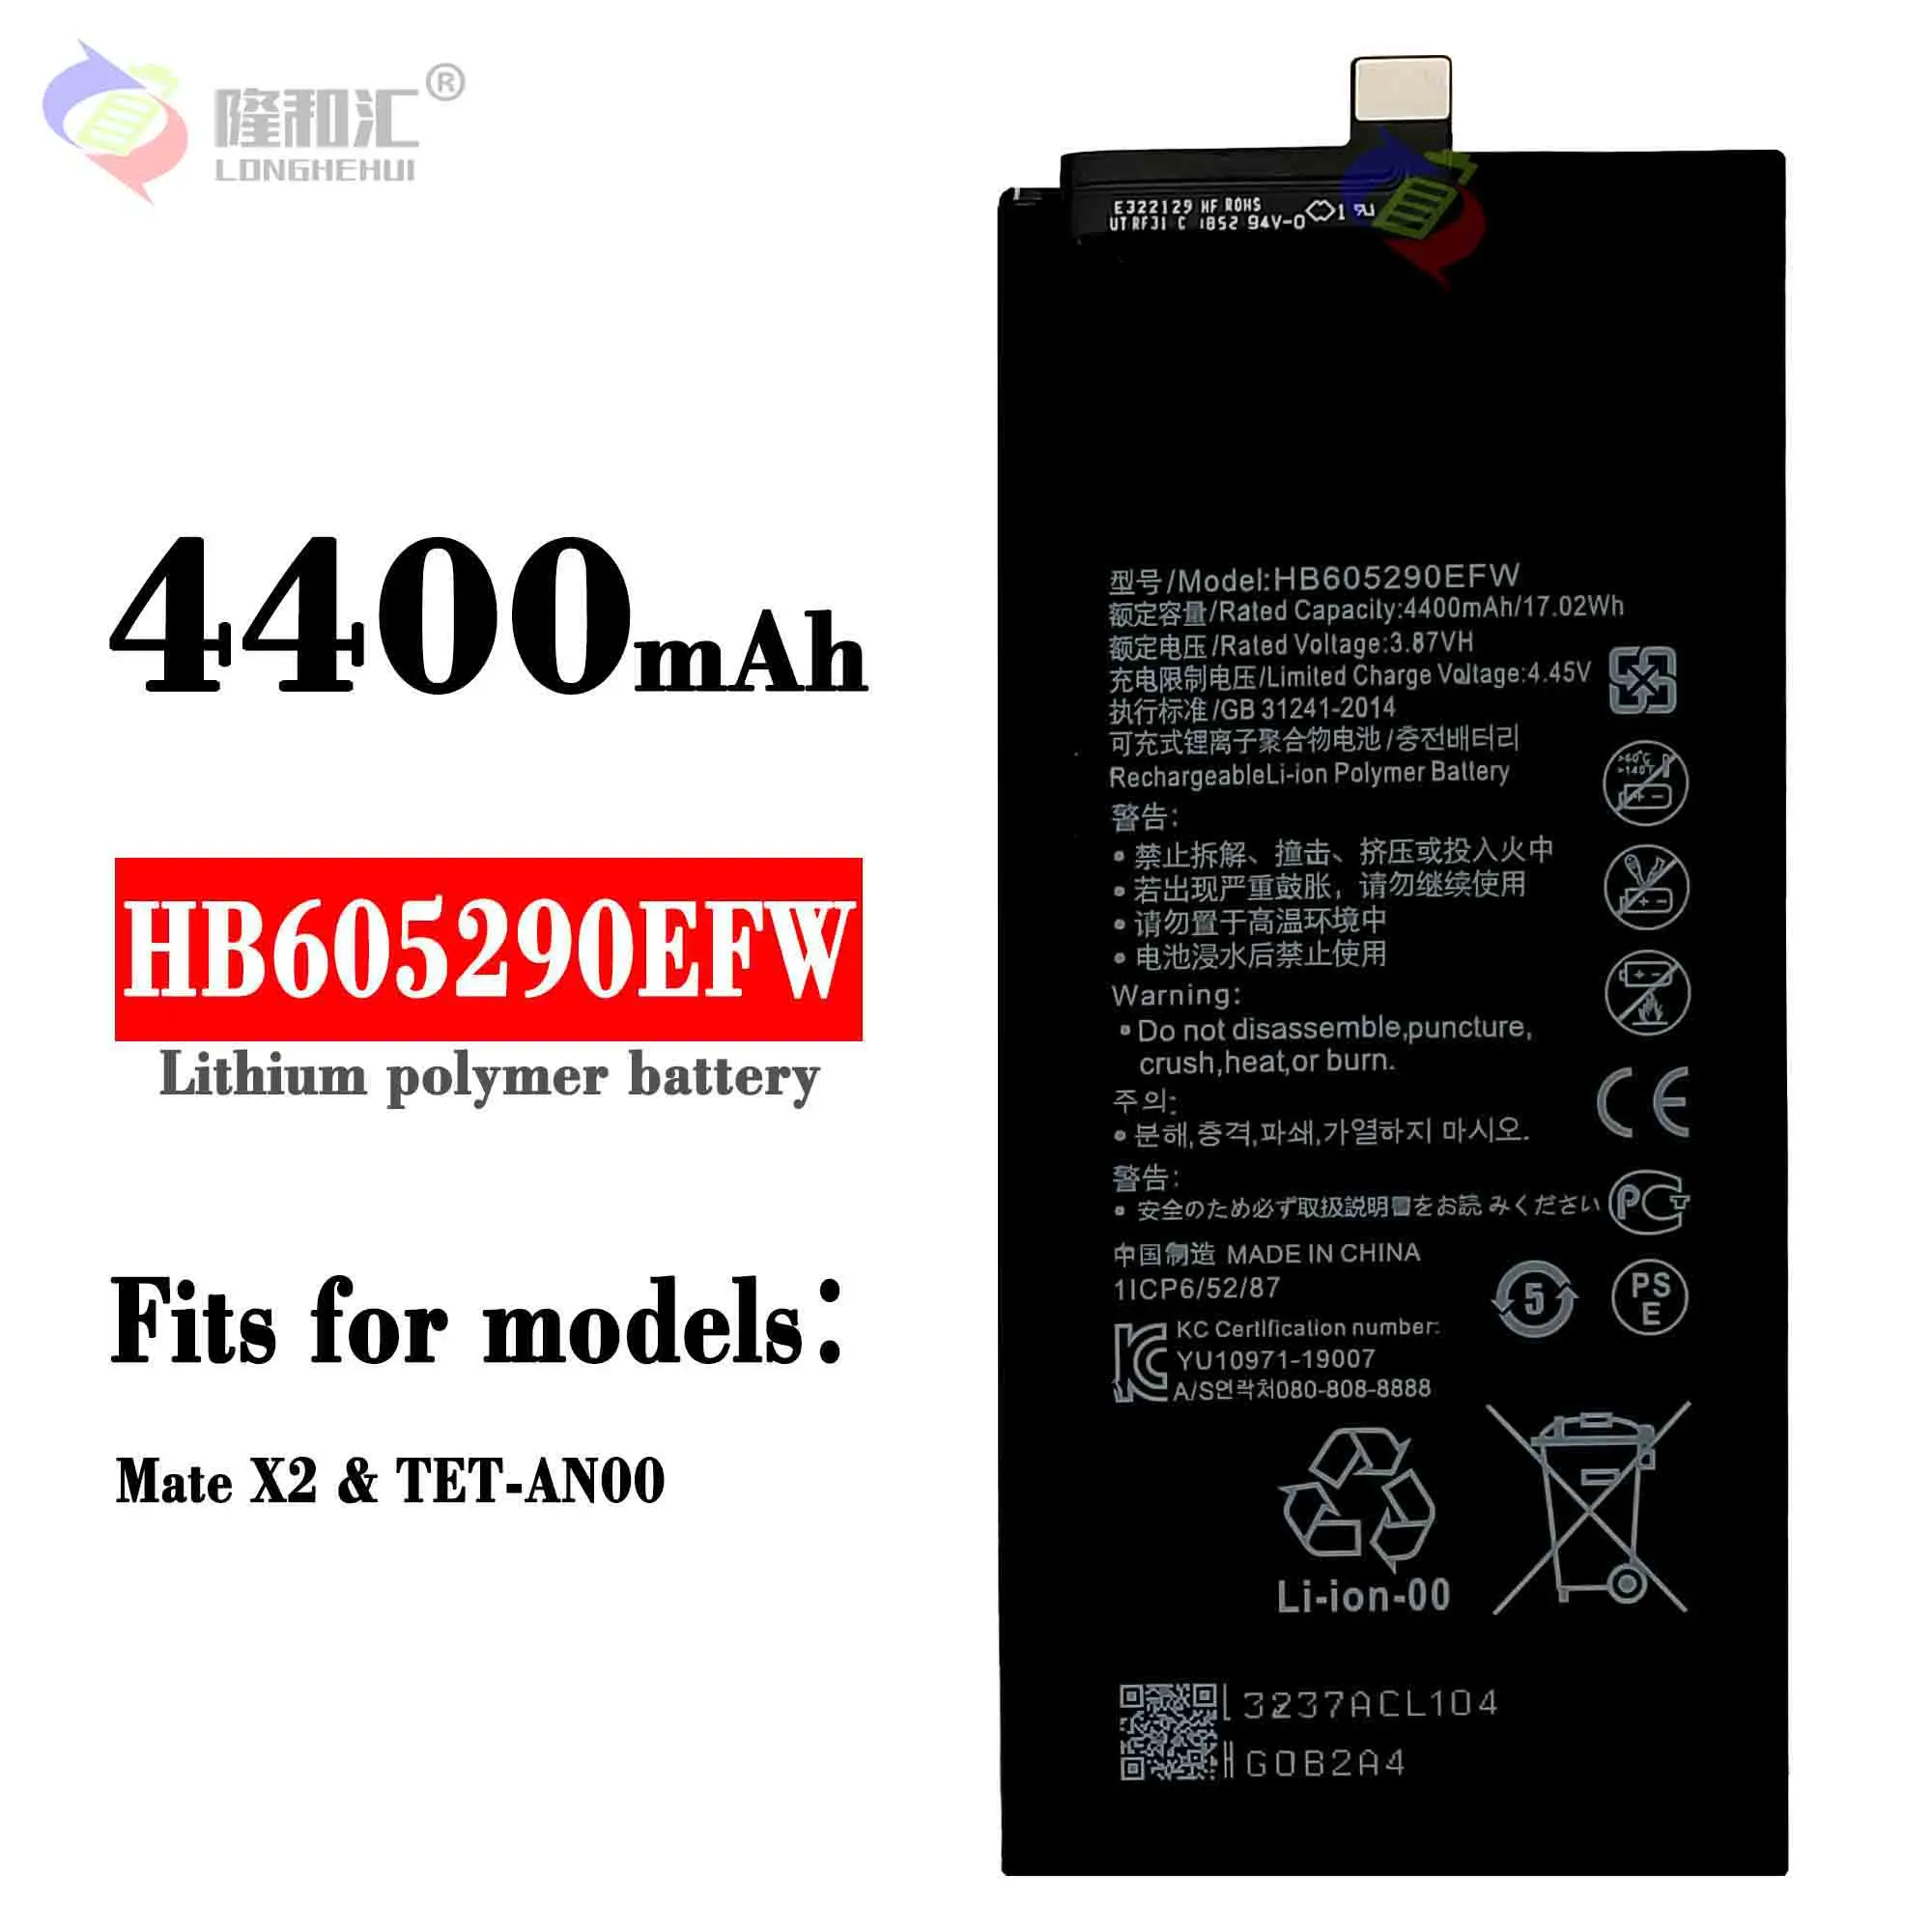 Orginal Replacement Battery For Huawei MATE X2 TET-AN00 Mobile Phone HB605290EFW New Built-in Battery Large Capacity Battery